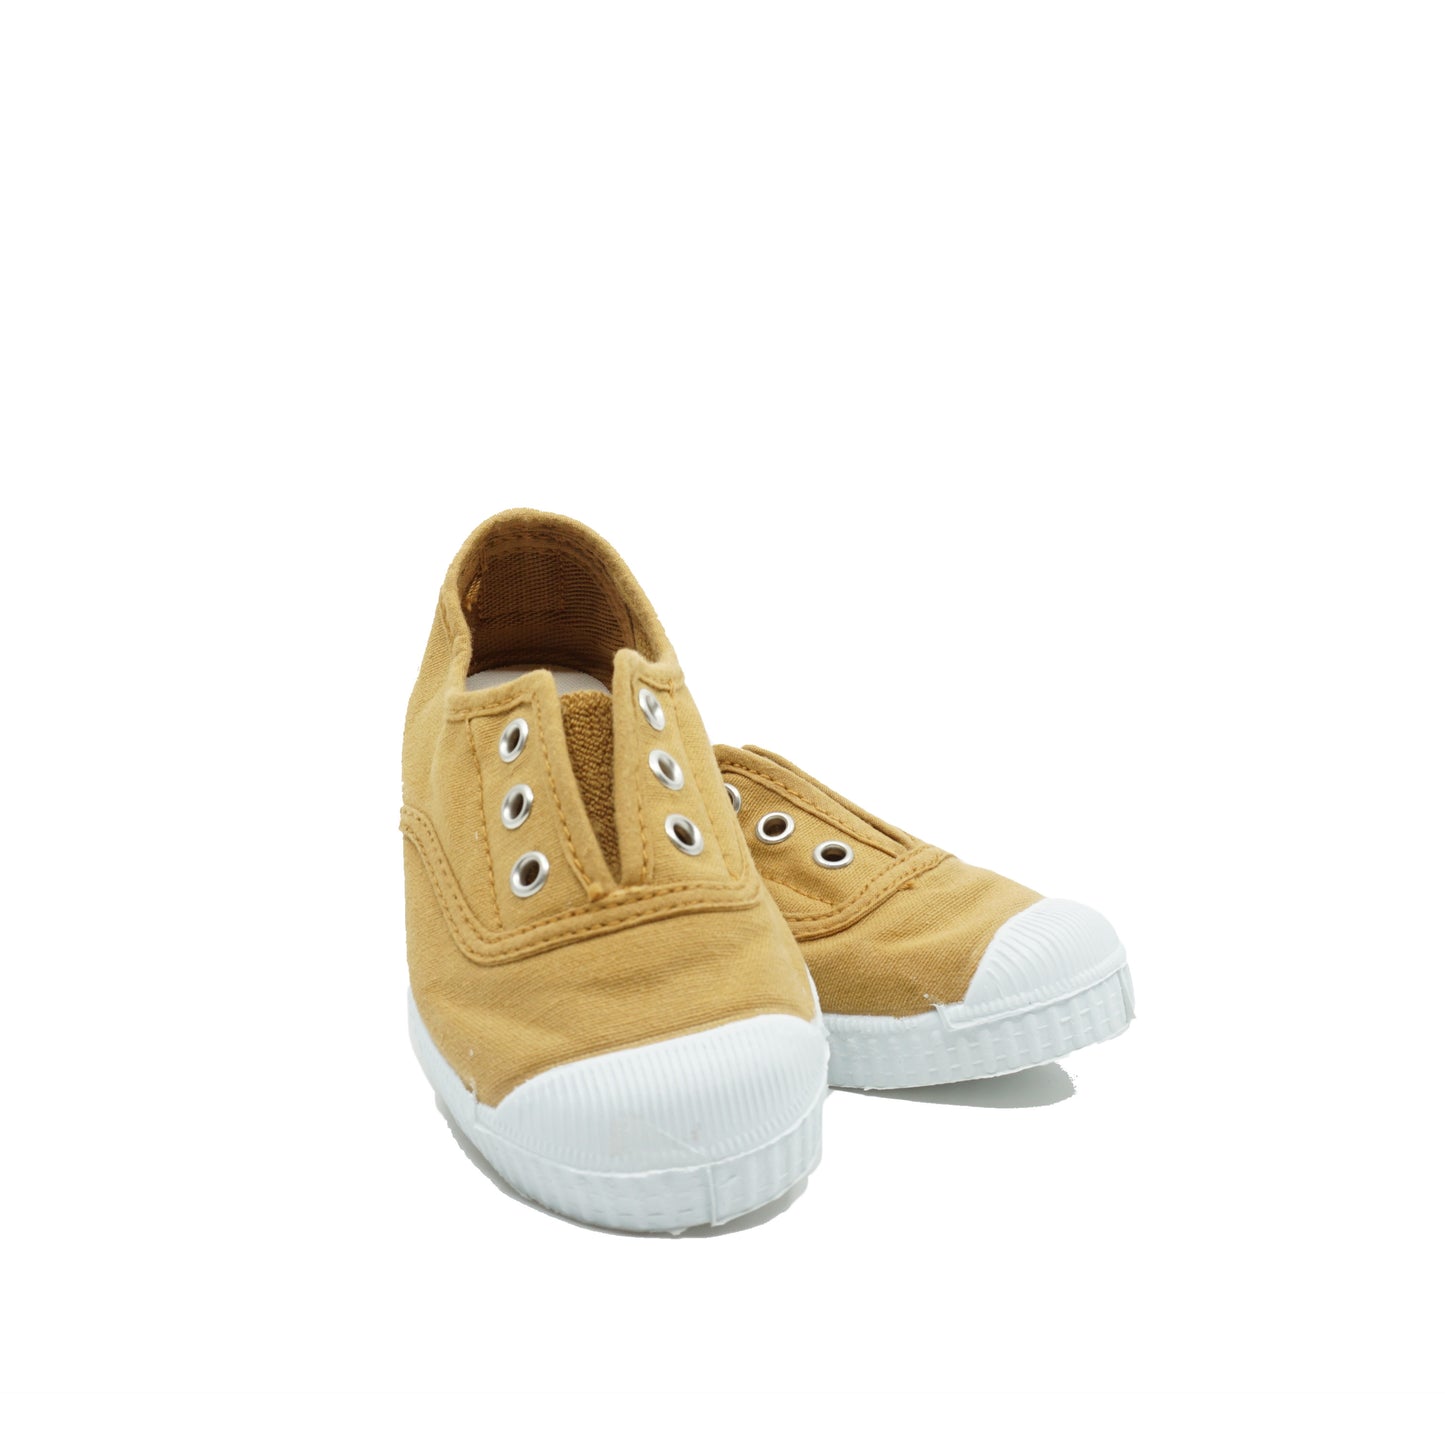 Chaussures Cienta Play Jaune Moutarde (22-34)